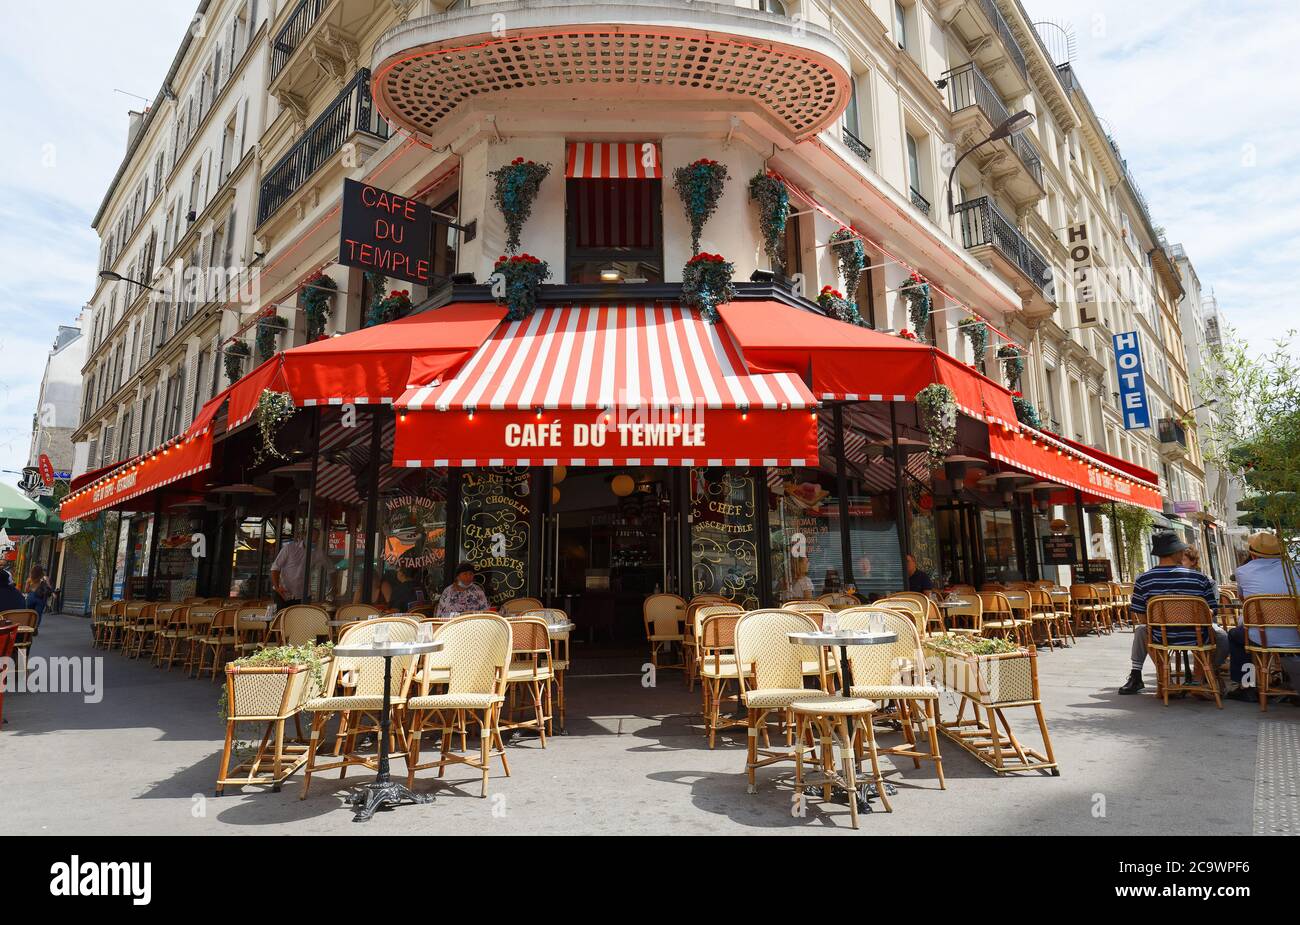 The traditional French cafe du Temple located near Republic square